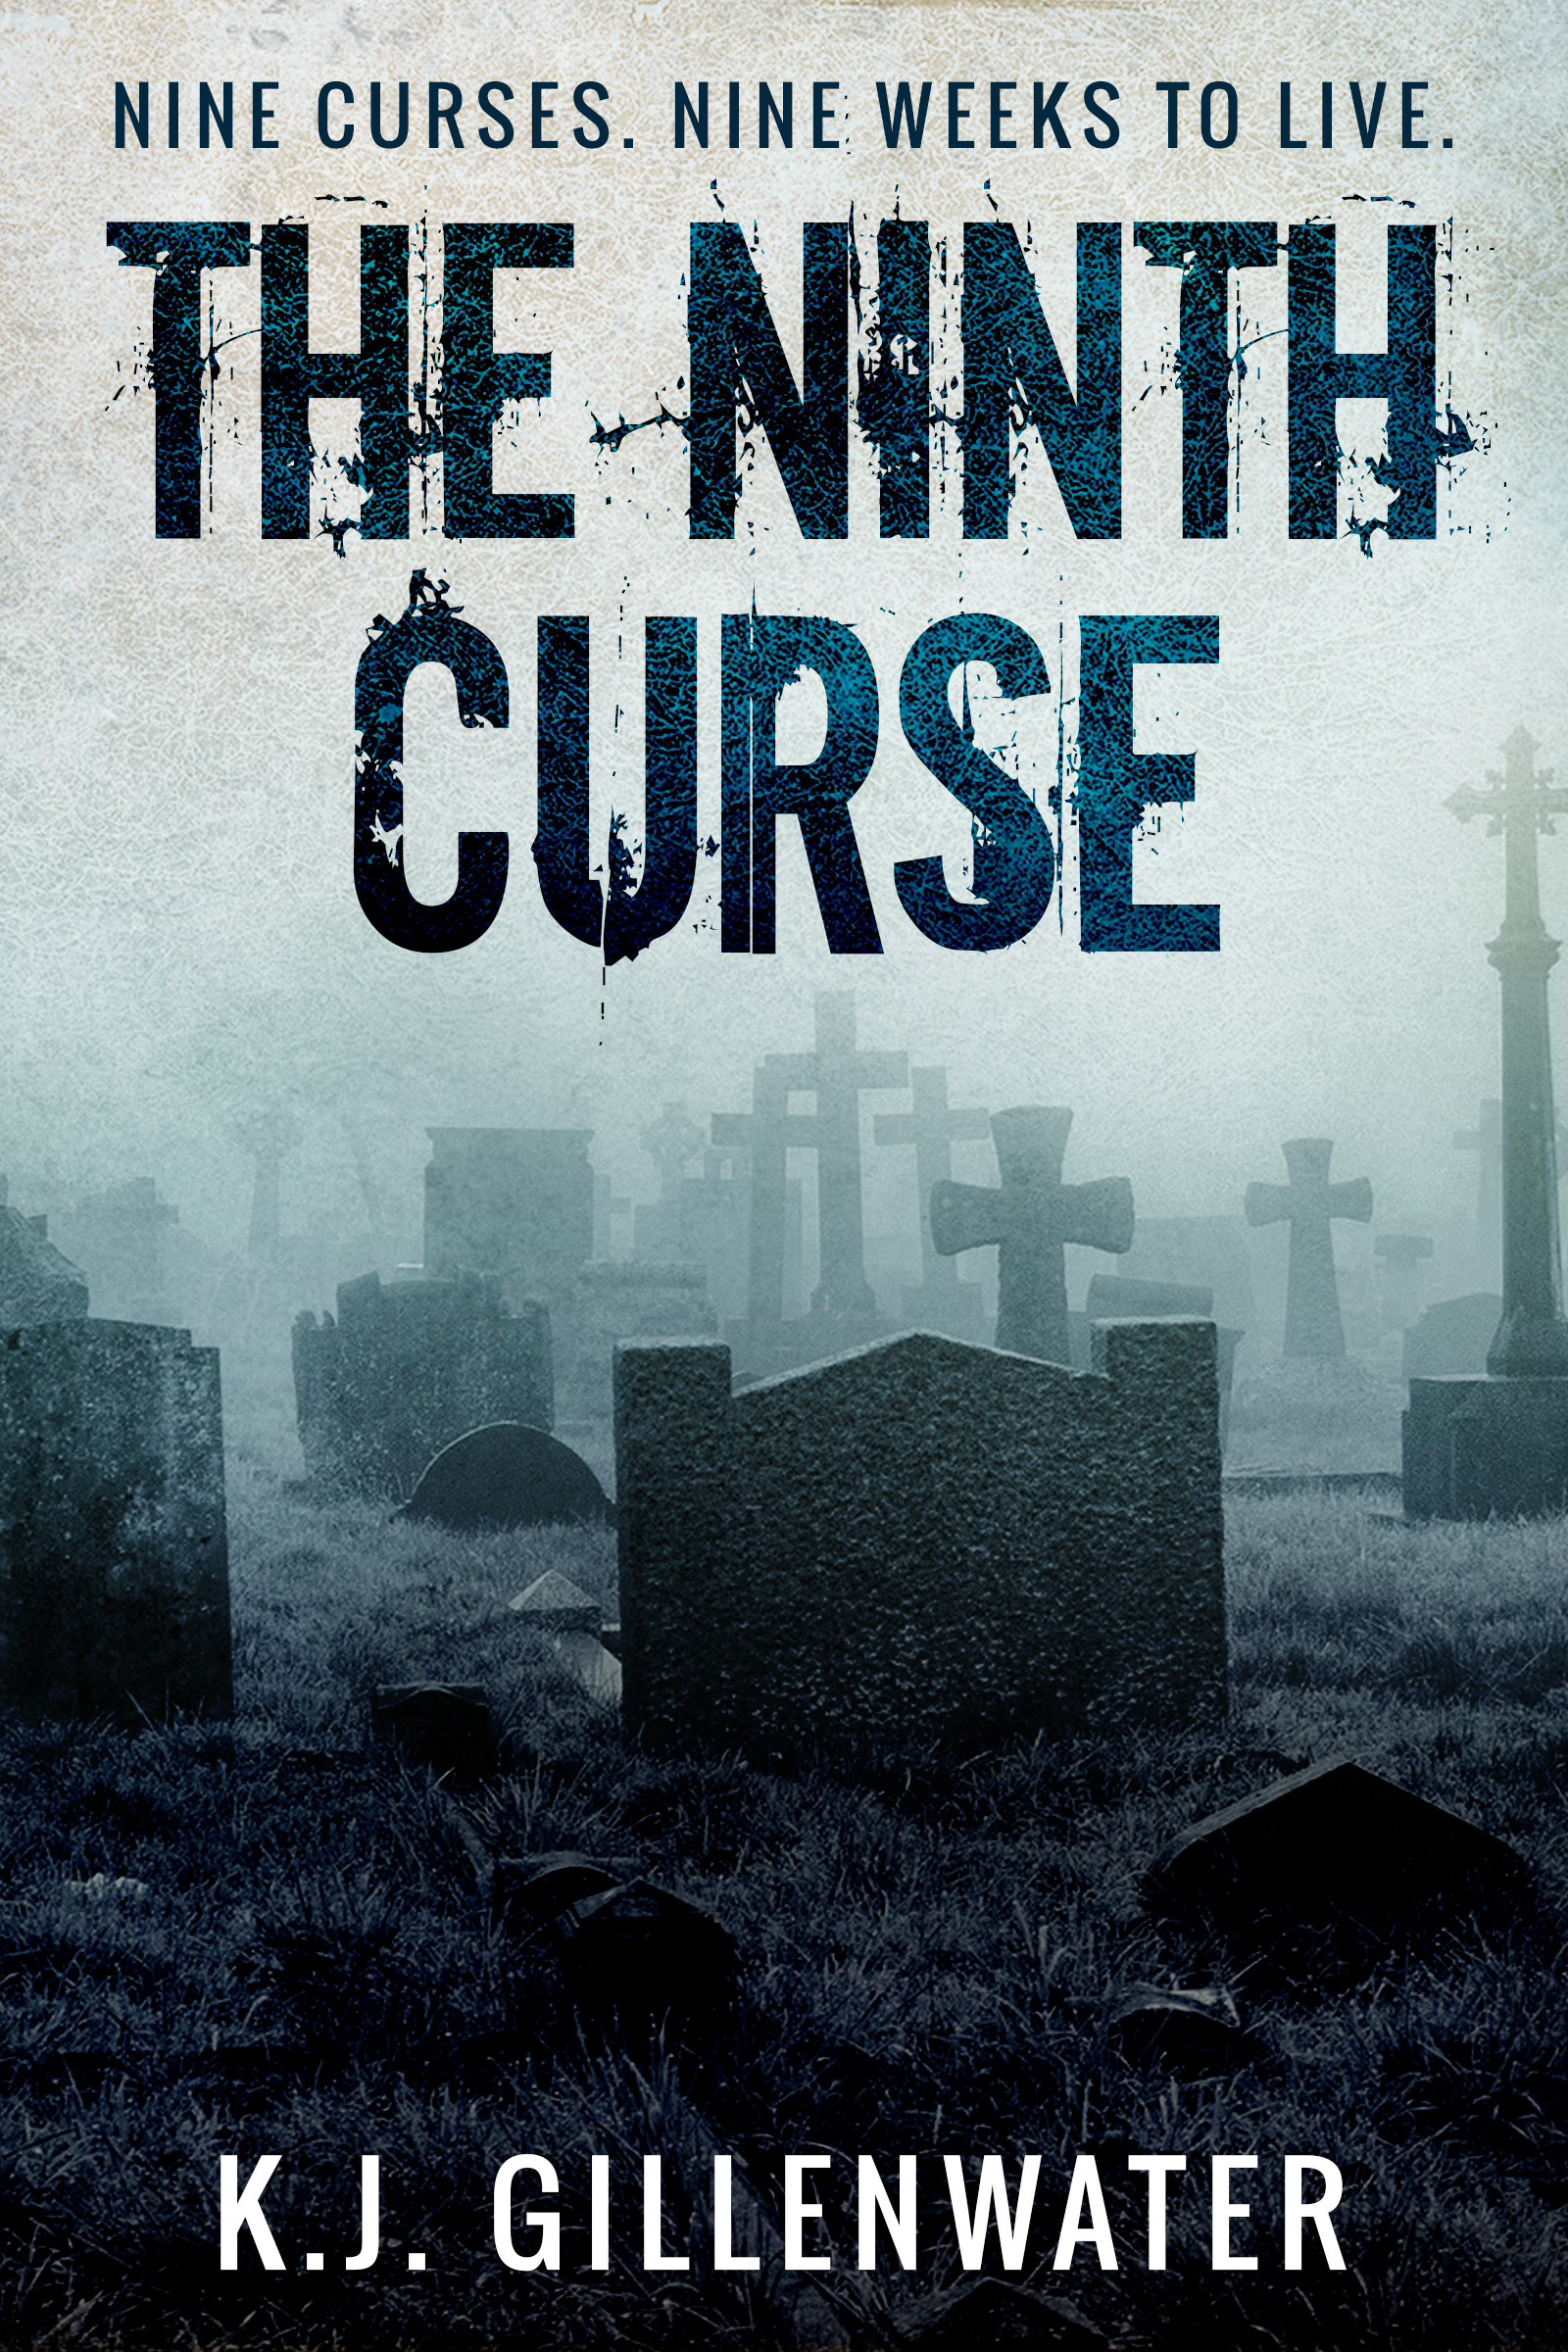 A graveyard with some crosses and the words " the ninth curse ".